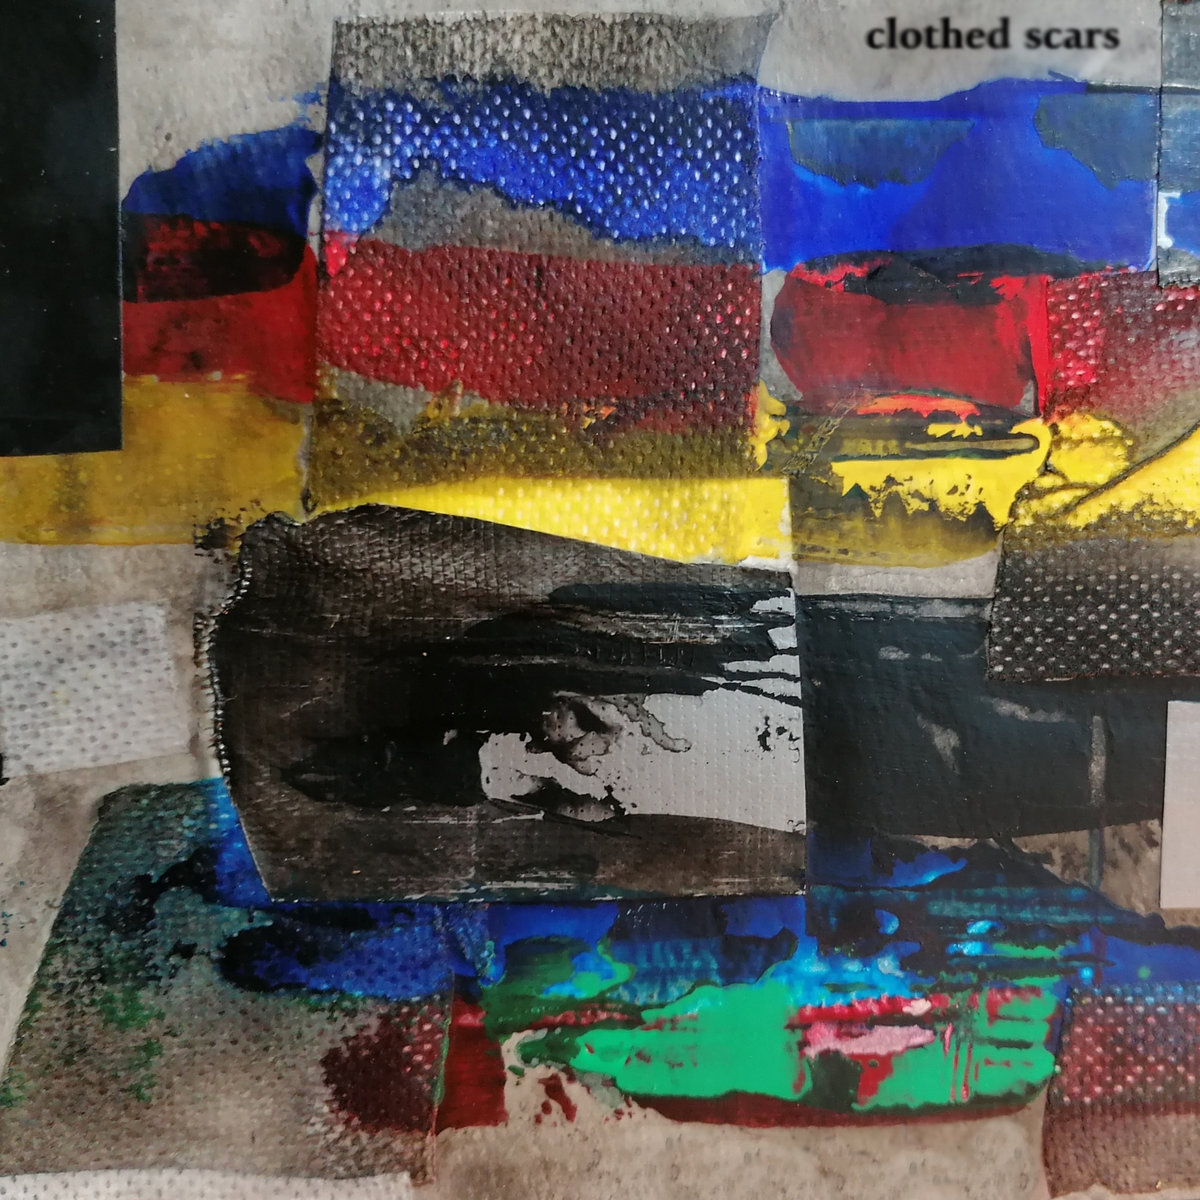 Martin Rach – Clothed scars